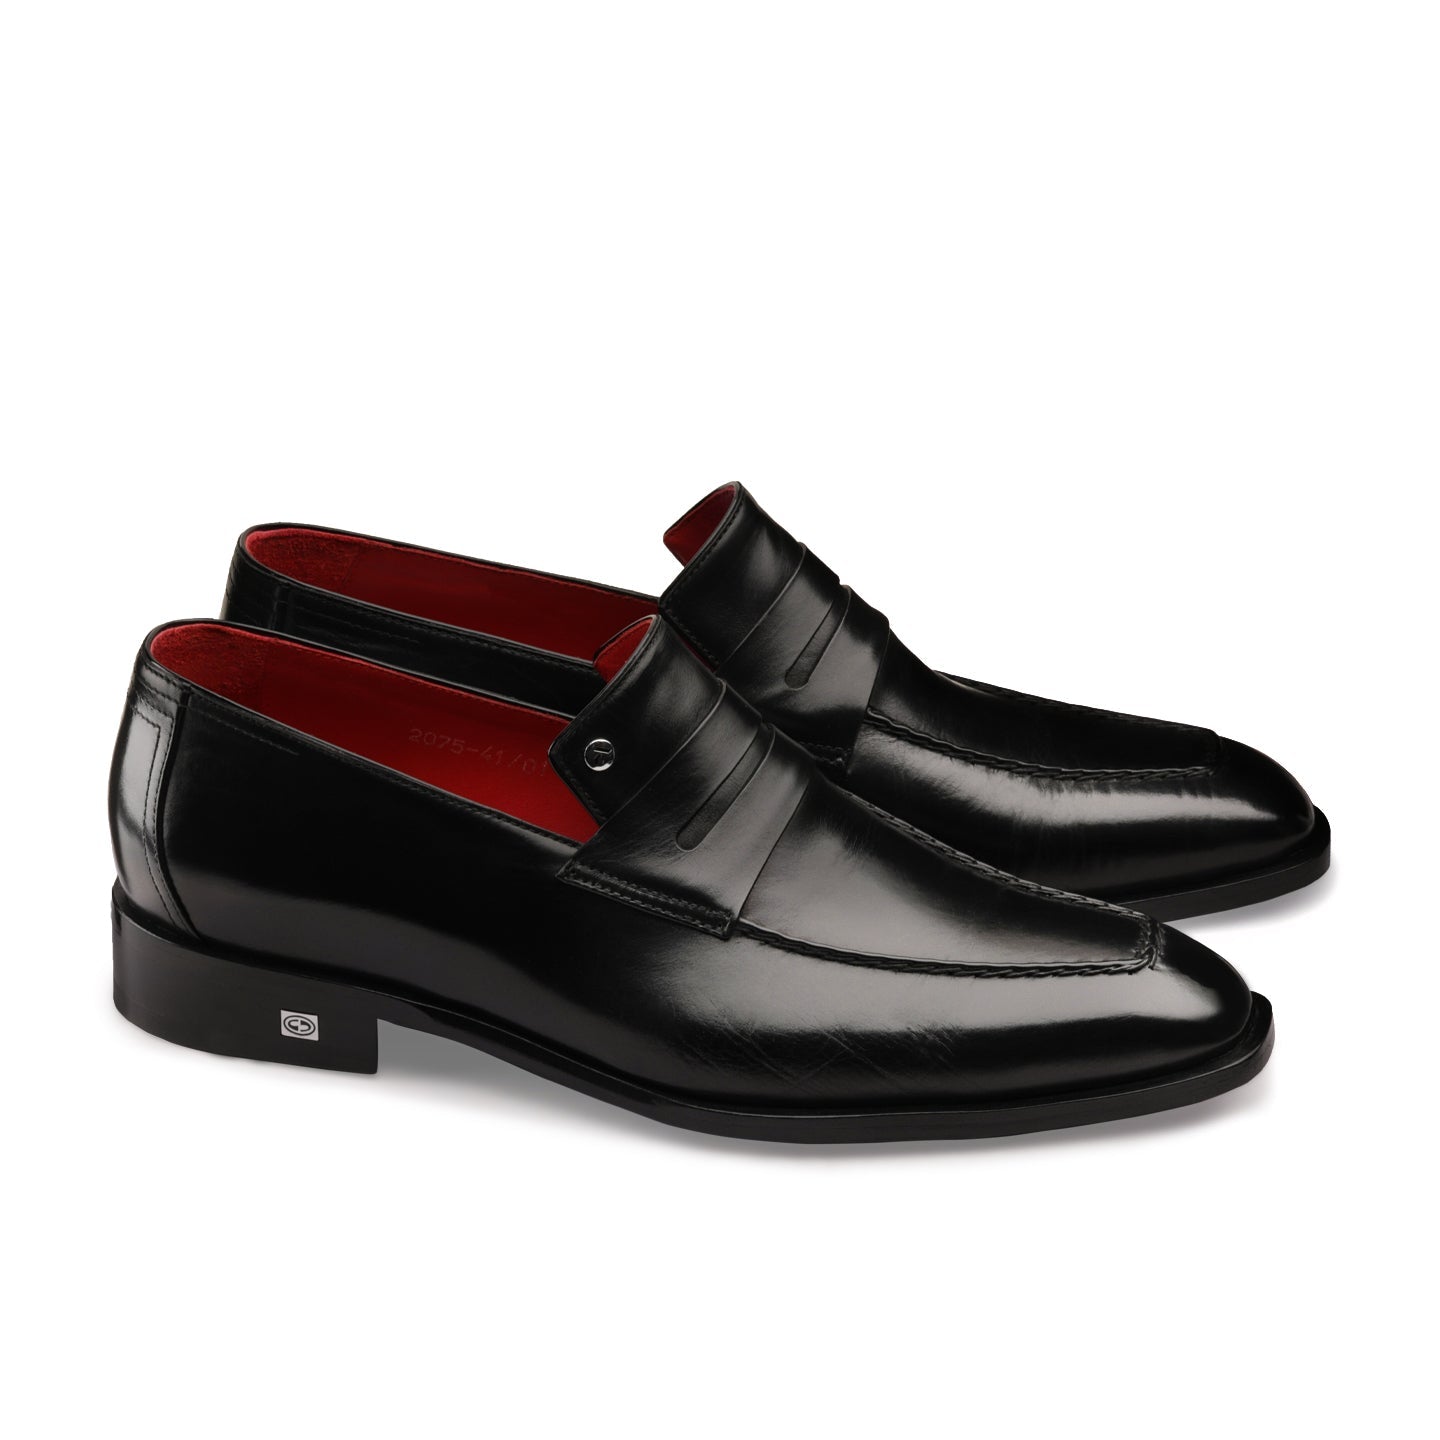 Classic black loafers